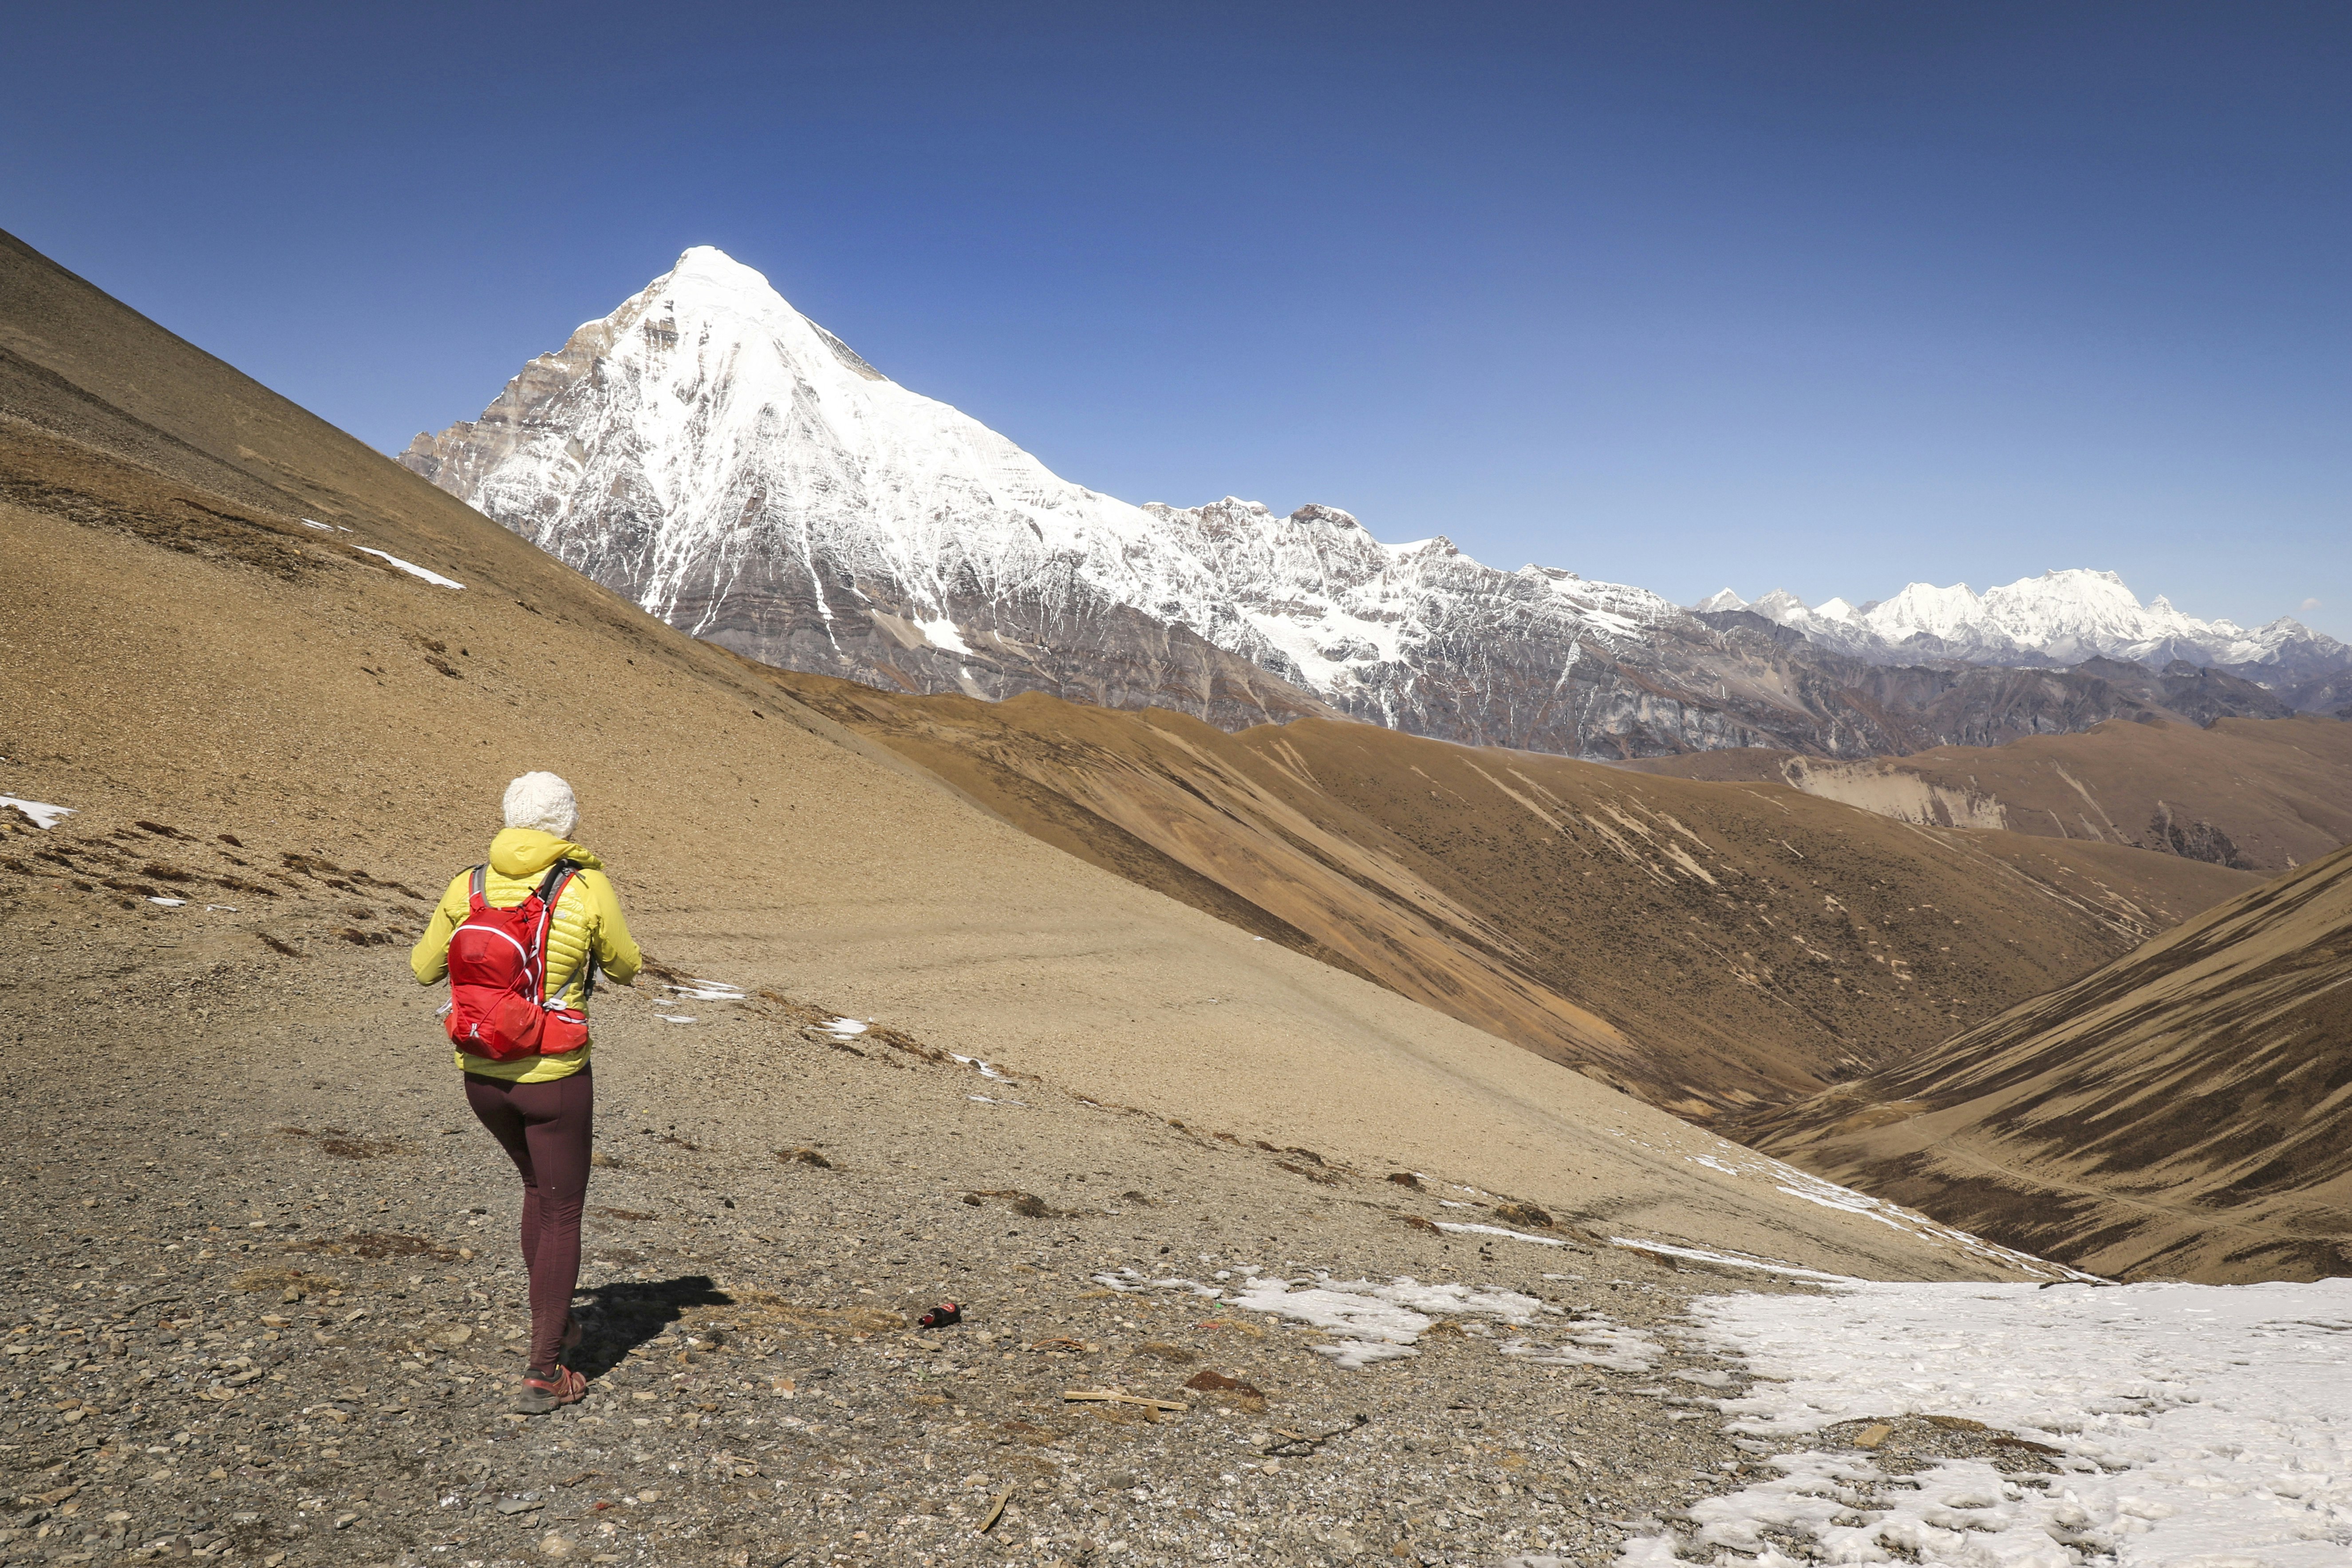 A trekker in purple trowsers and yellow down jacket (and red backpack) hikes on a gravel slope and looks beyond to a snowcapped mountain peak.